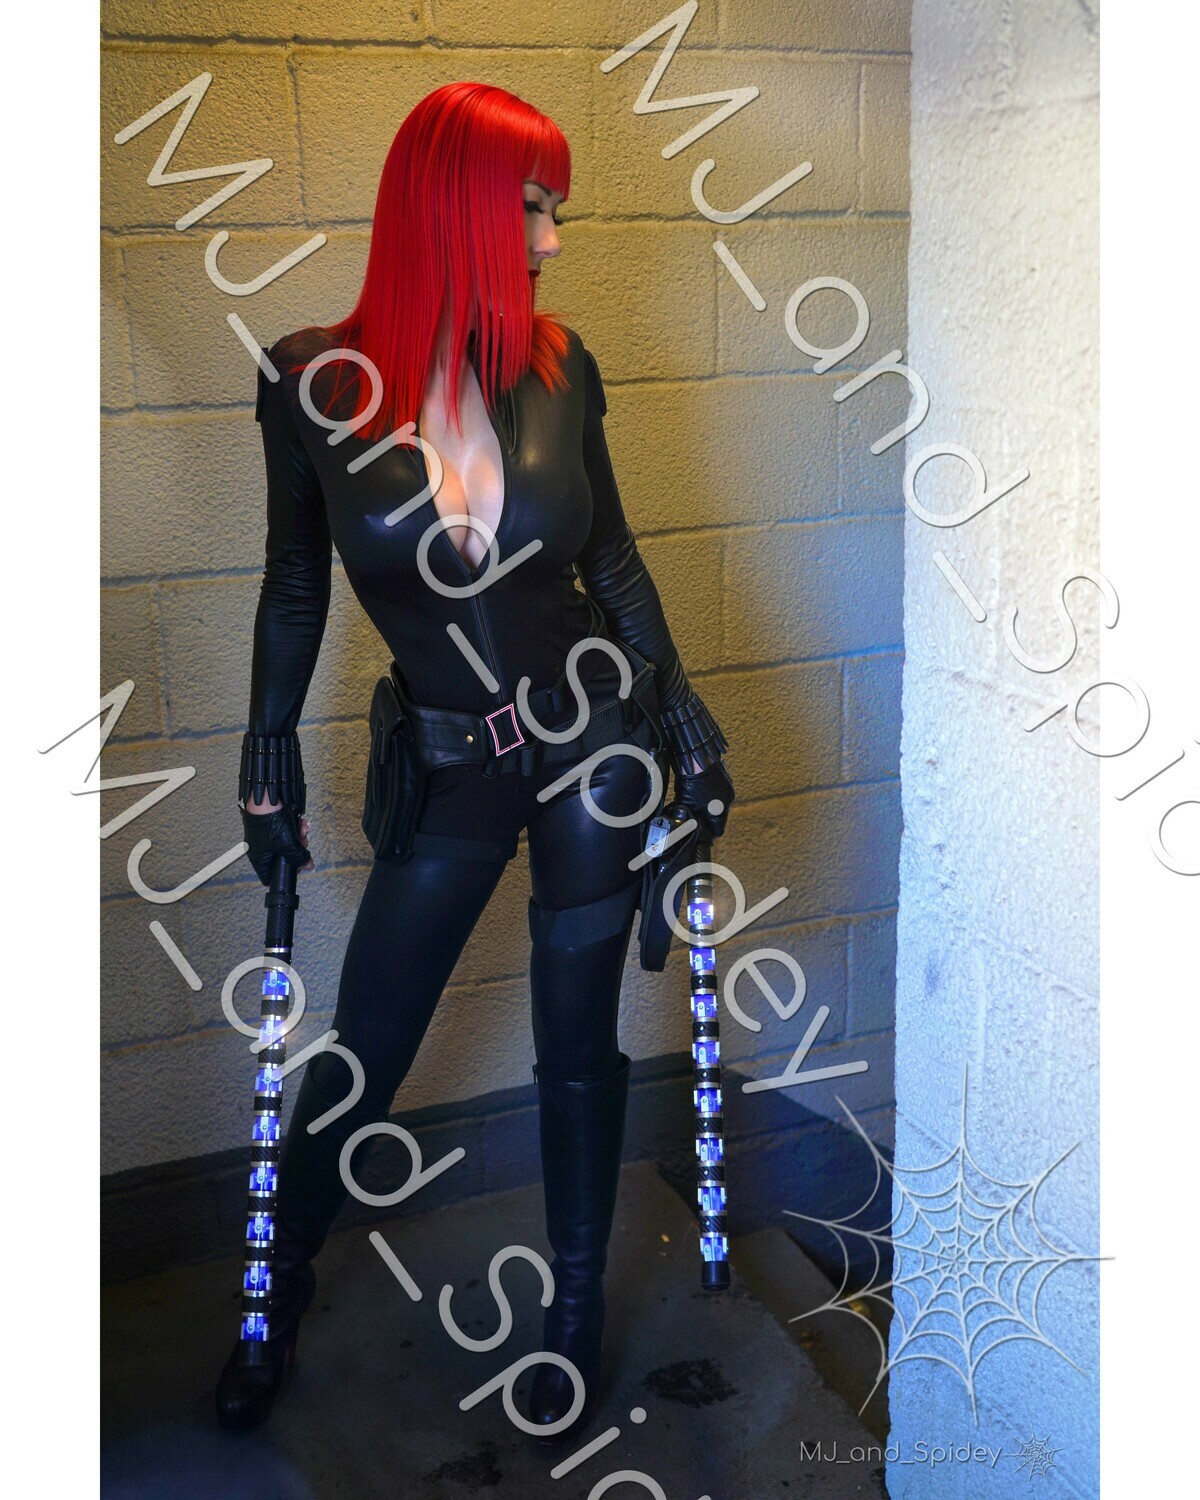 Marvel - Avengers - Black Widow 9 - Digital Cosplay Image (@MJ_and_Spidey, MJ and Spidey, Comics)